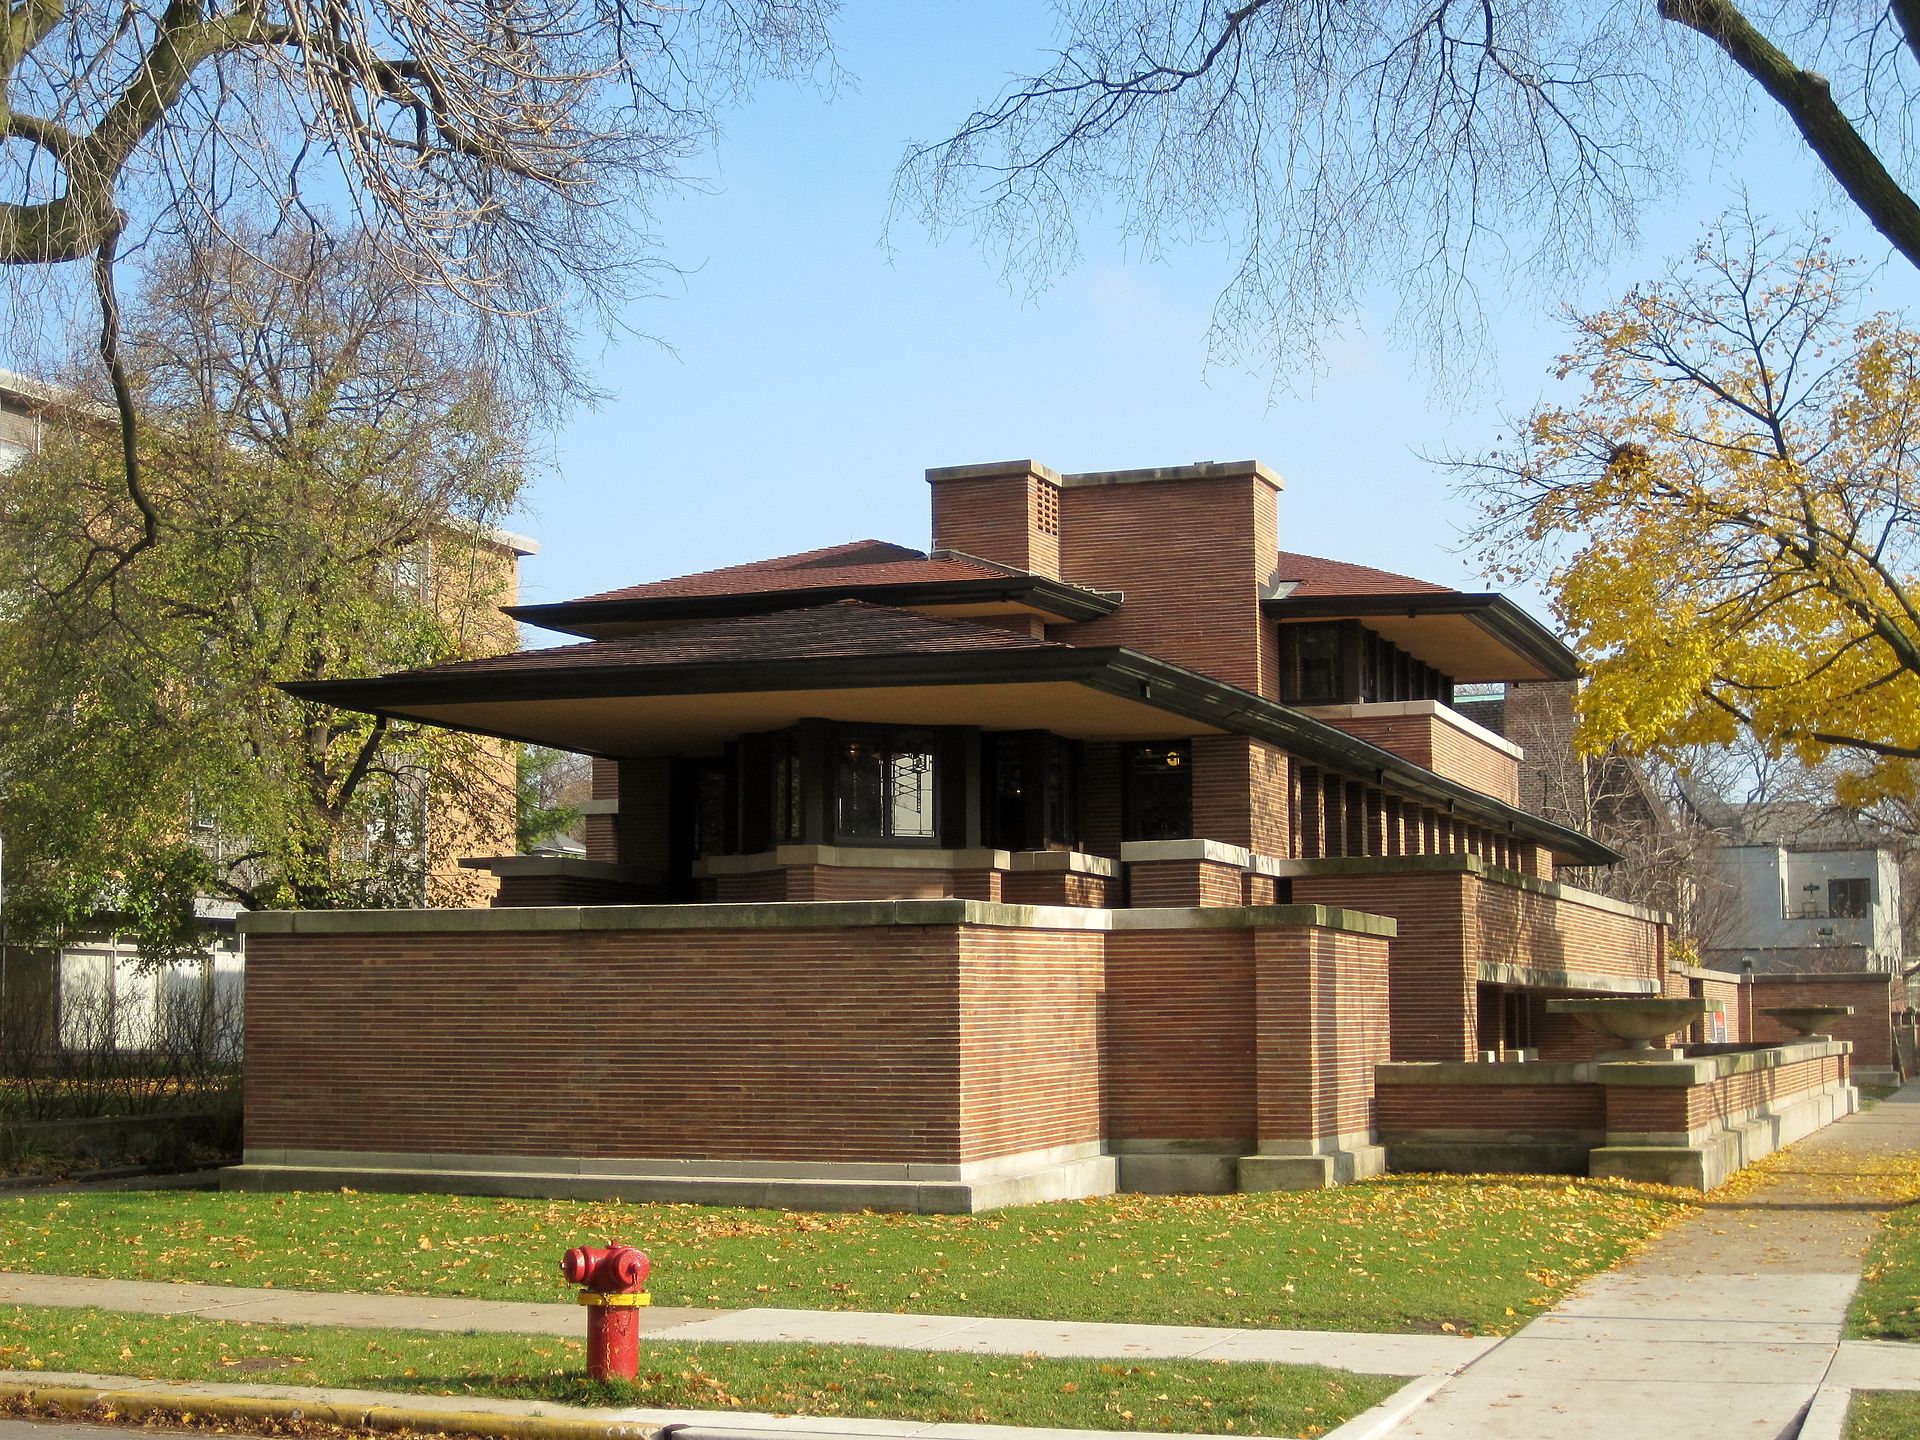 Frank Lloyd Wright RobieHouse (from Wikipidia